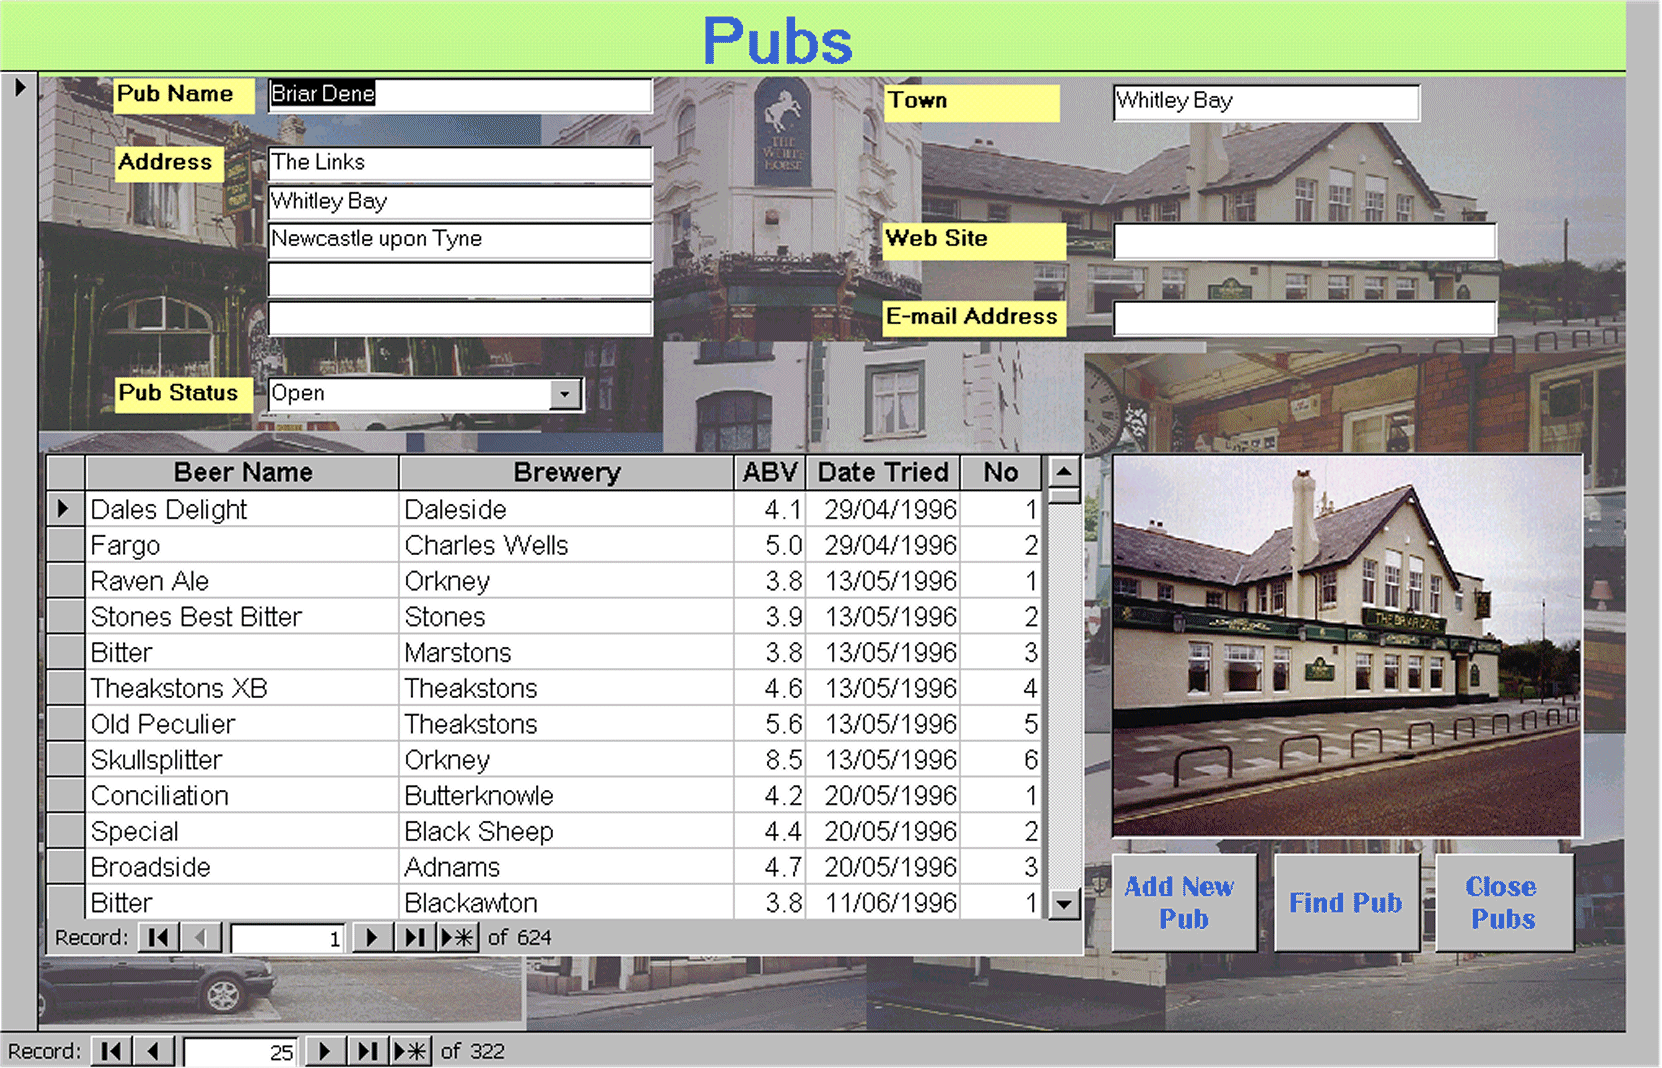 Pubs - Use this form to record beers tried in pubs